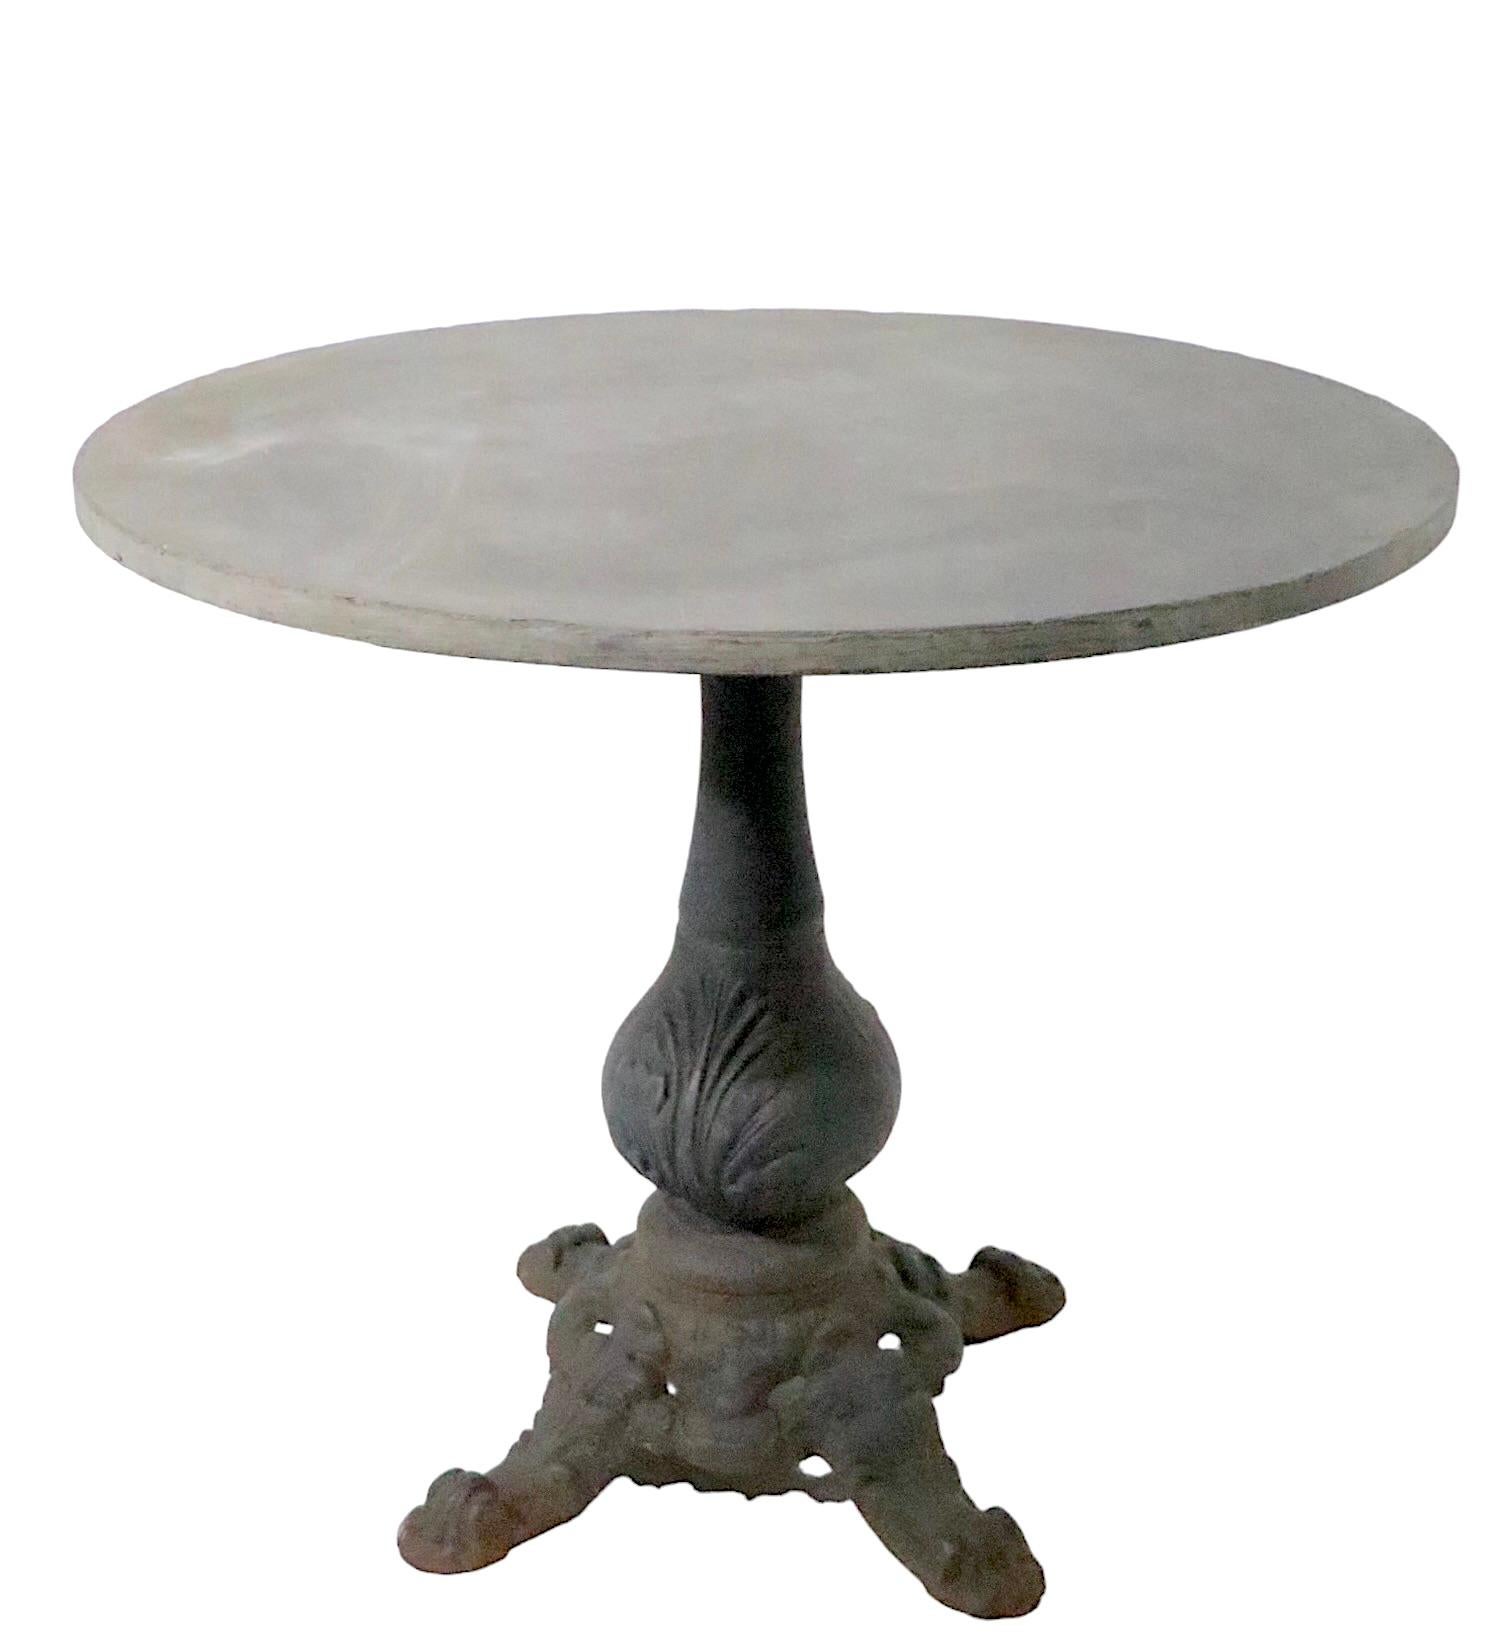 Nice cast iron base, slate, or granite top cafe, bistro, garden, patio table in the Victorian, French Provincial style, probably early 20th C production. The base is substantial, and heavy, making the table very sturdy and stable when the round